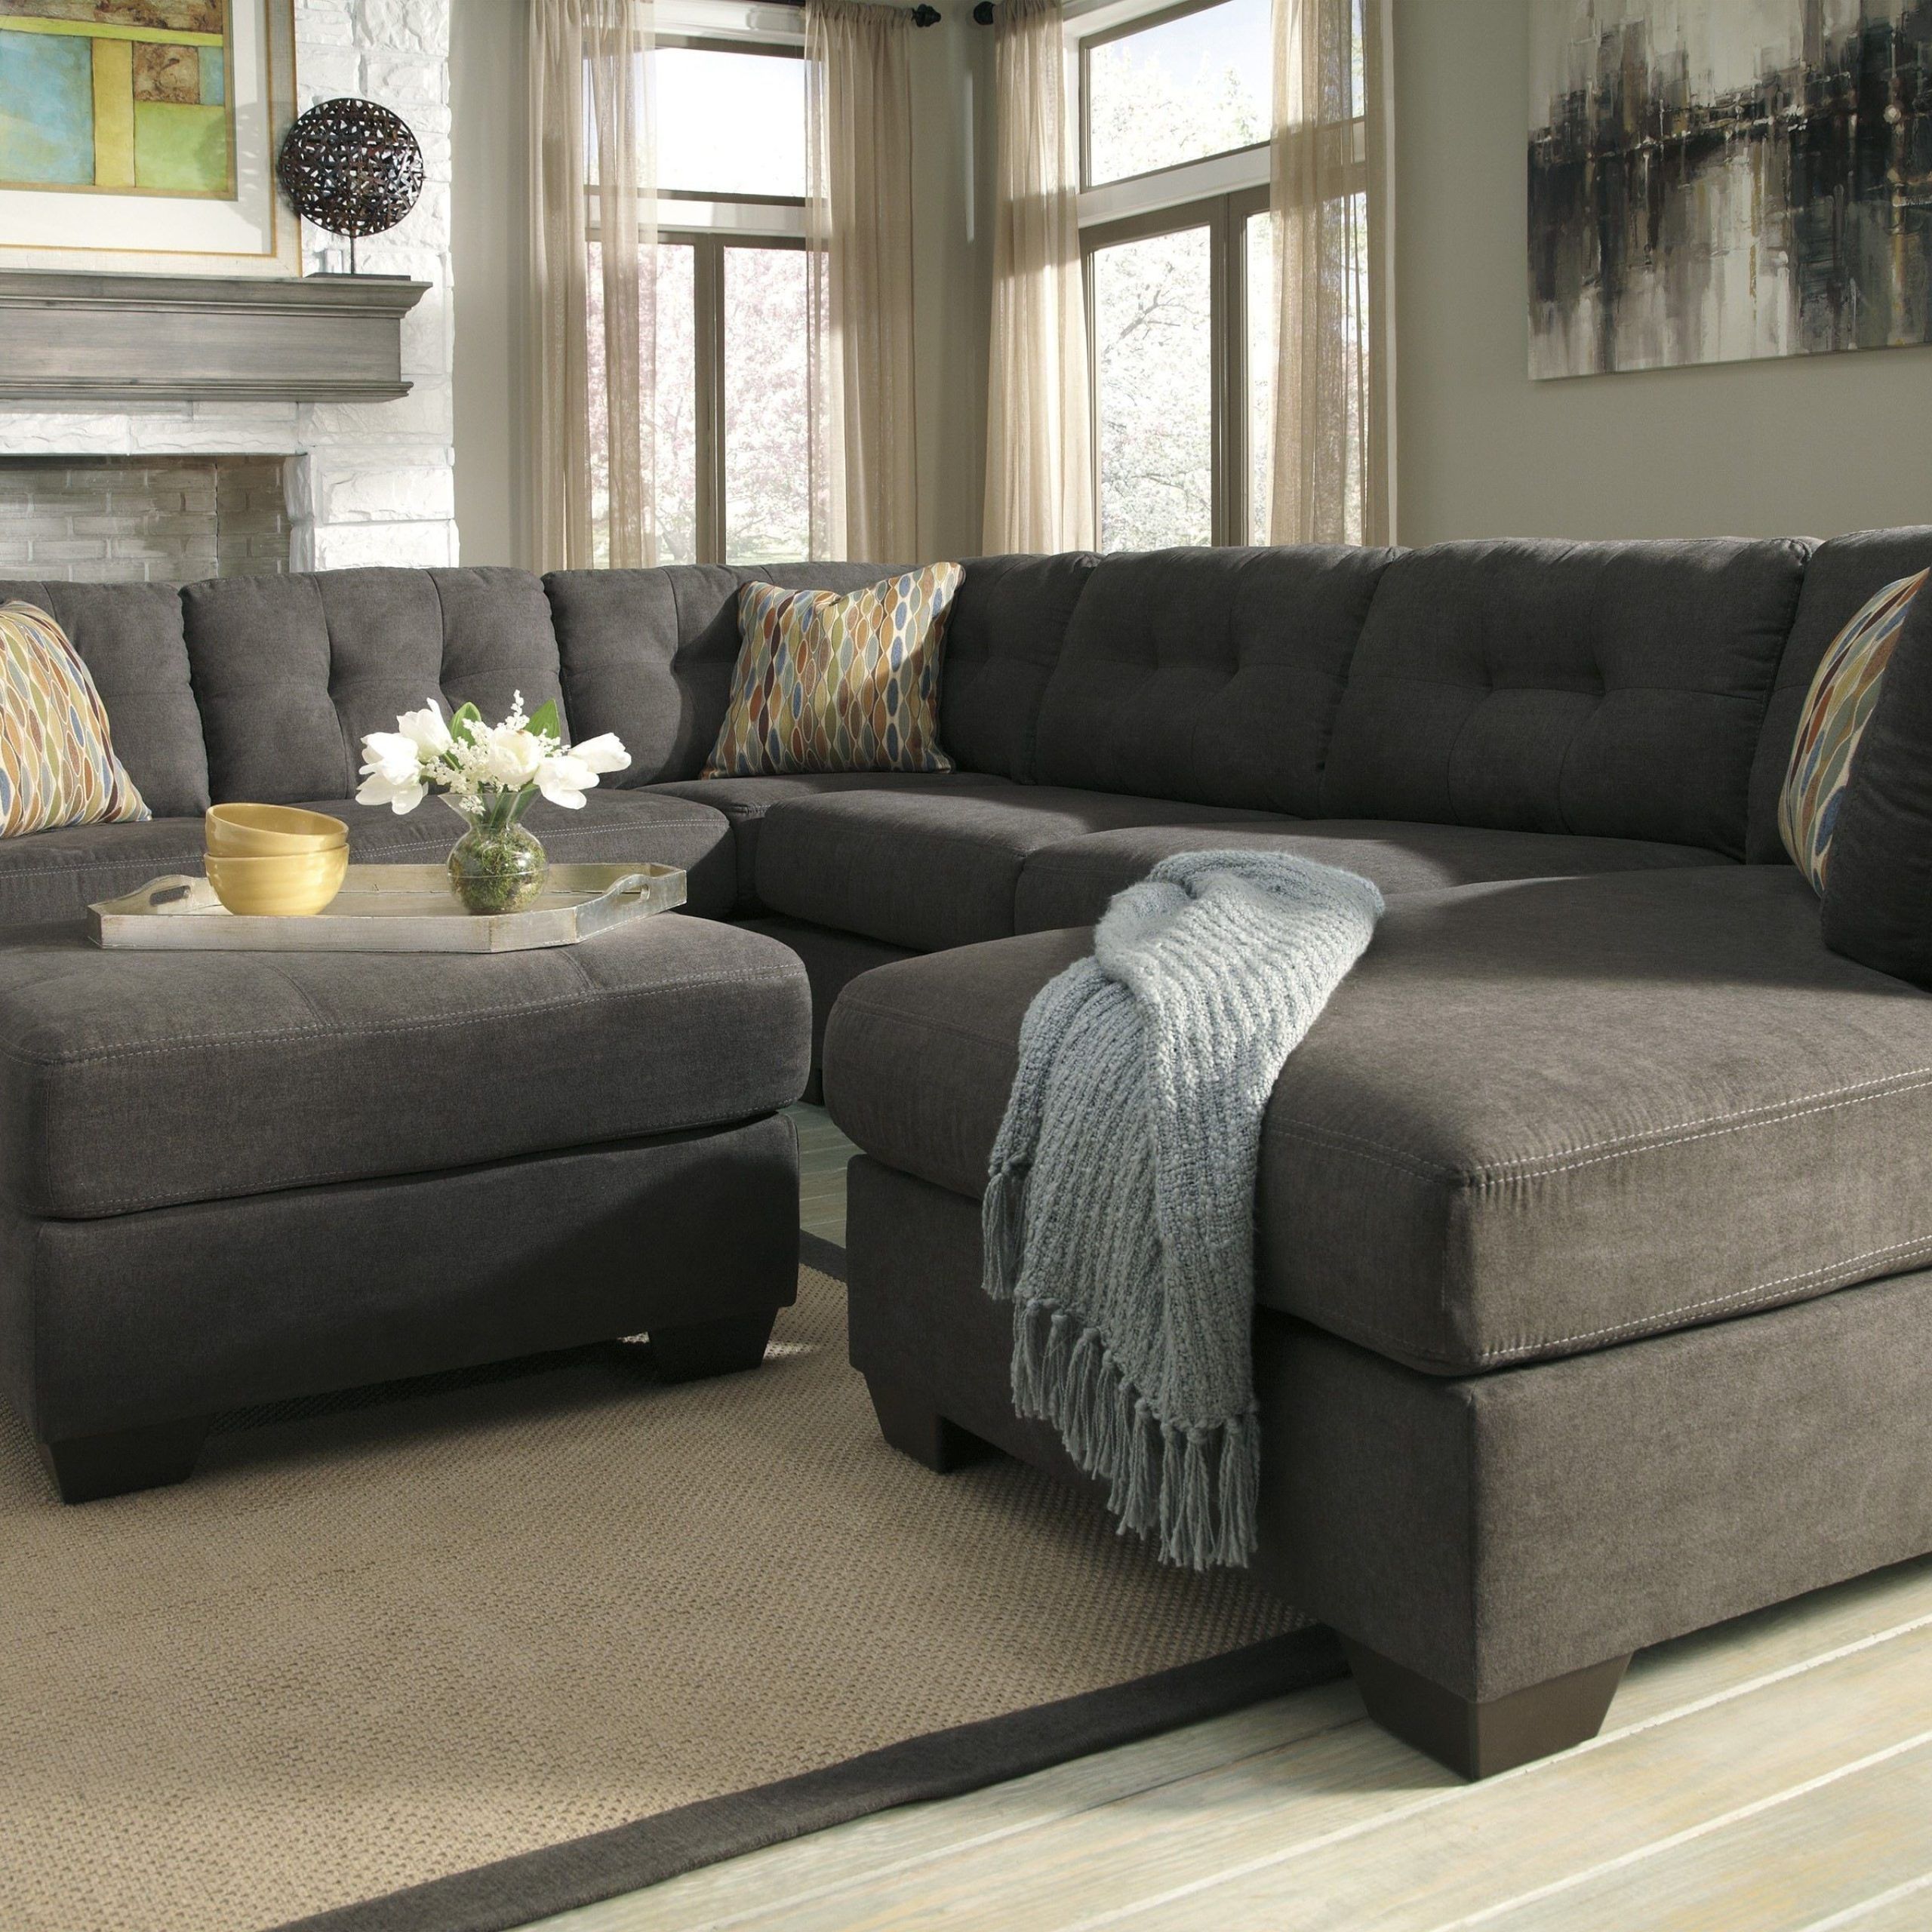 Brilliant Gray Sectional Sofa Modular Lounges Melbourne Inside Dark Grey Polyester Sofa Couches (View 8 of 20)